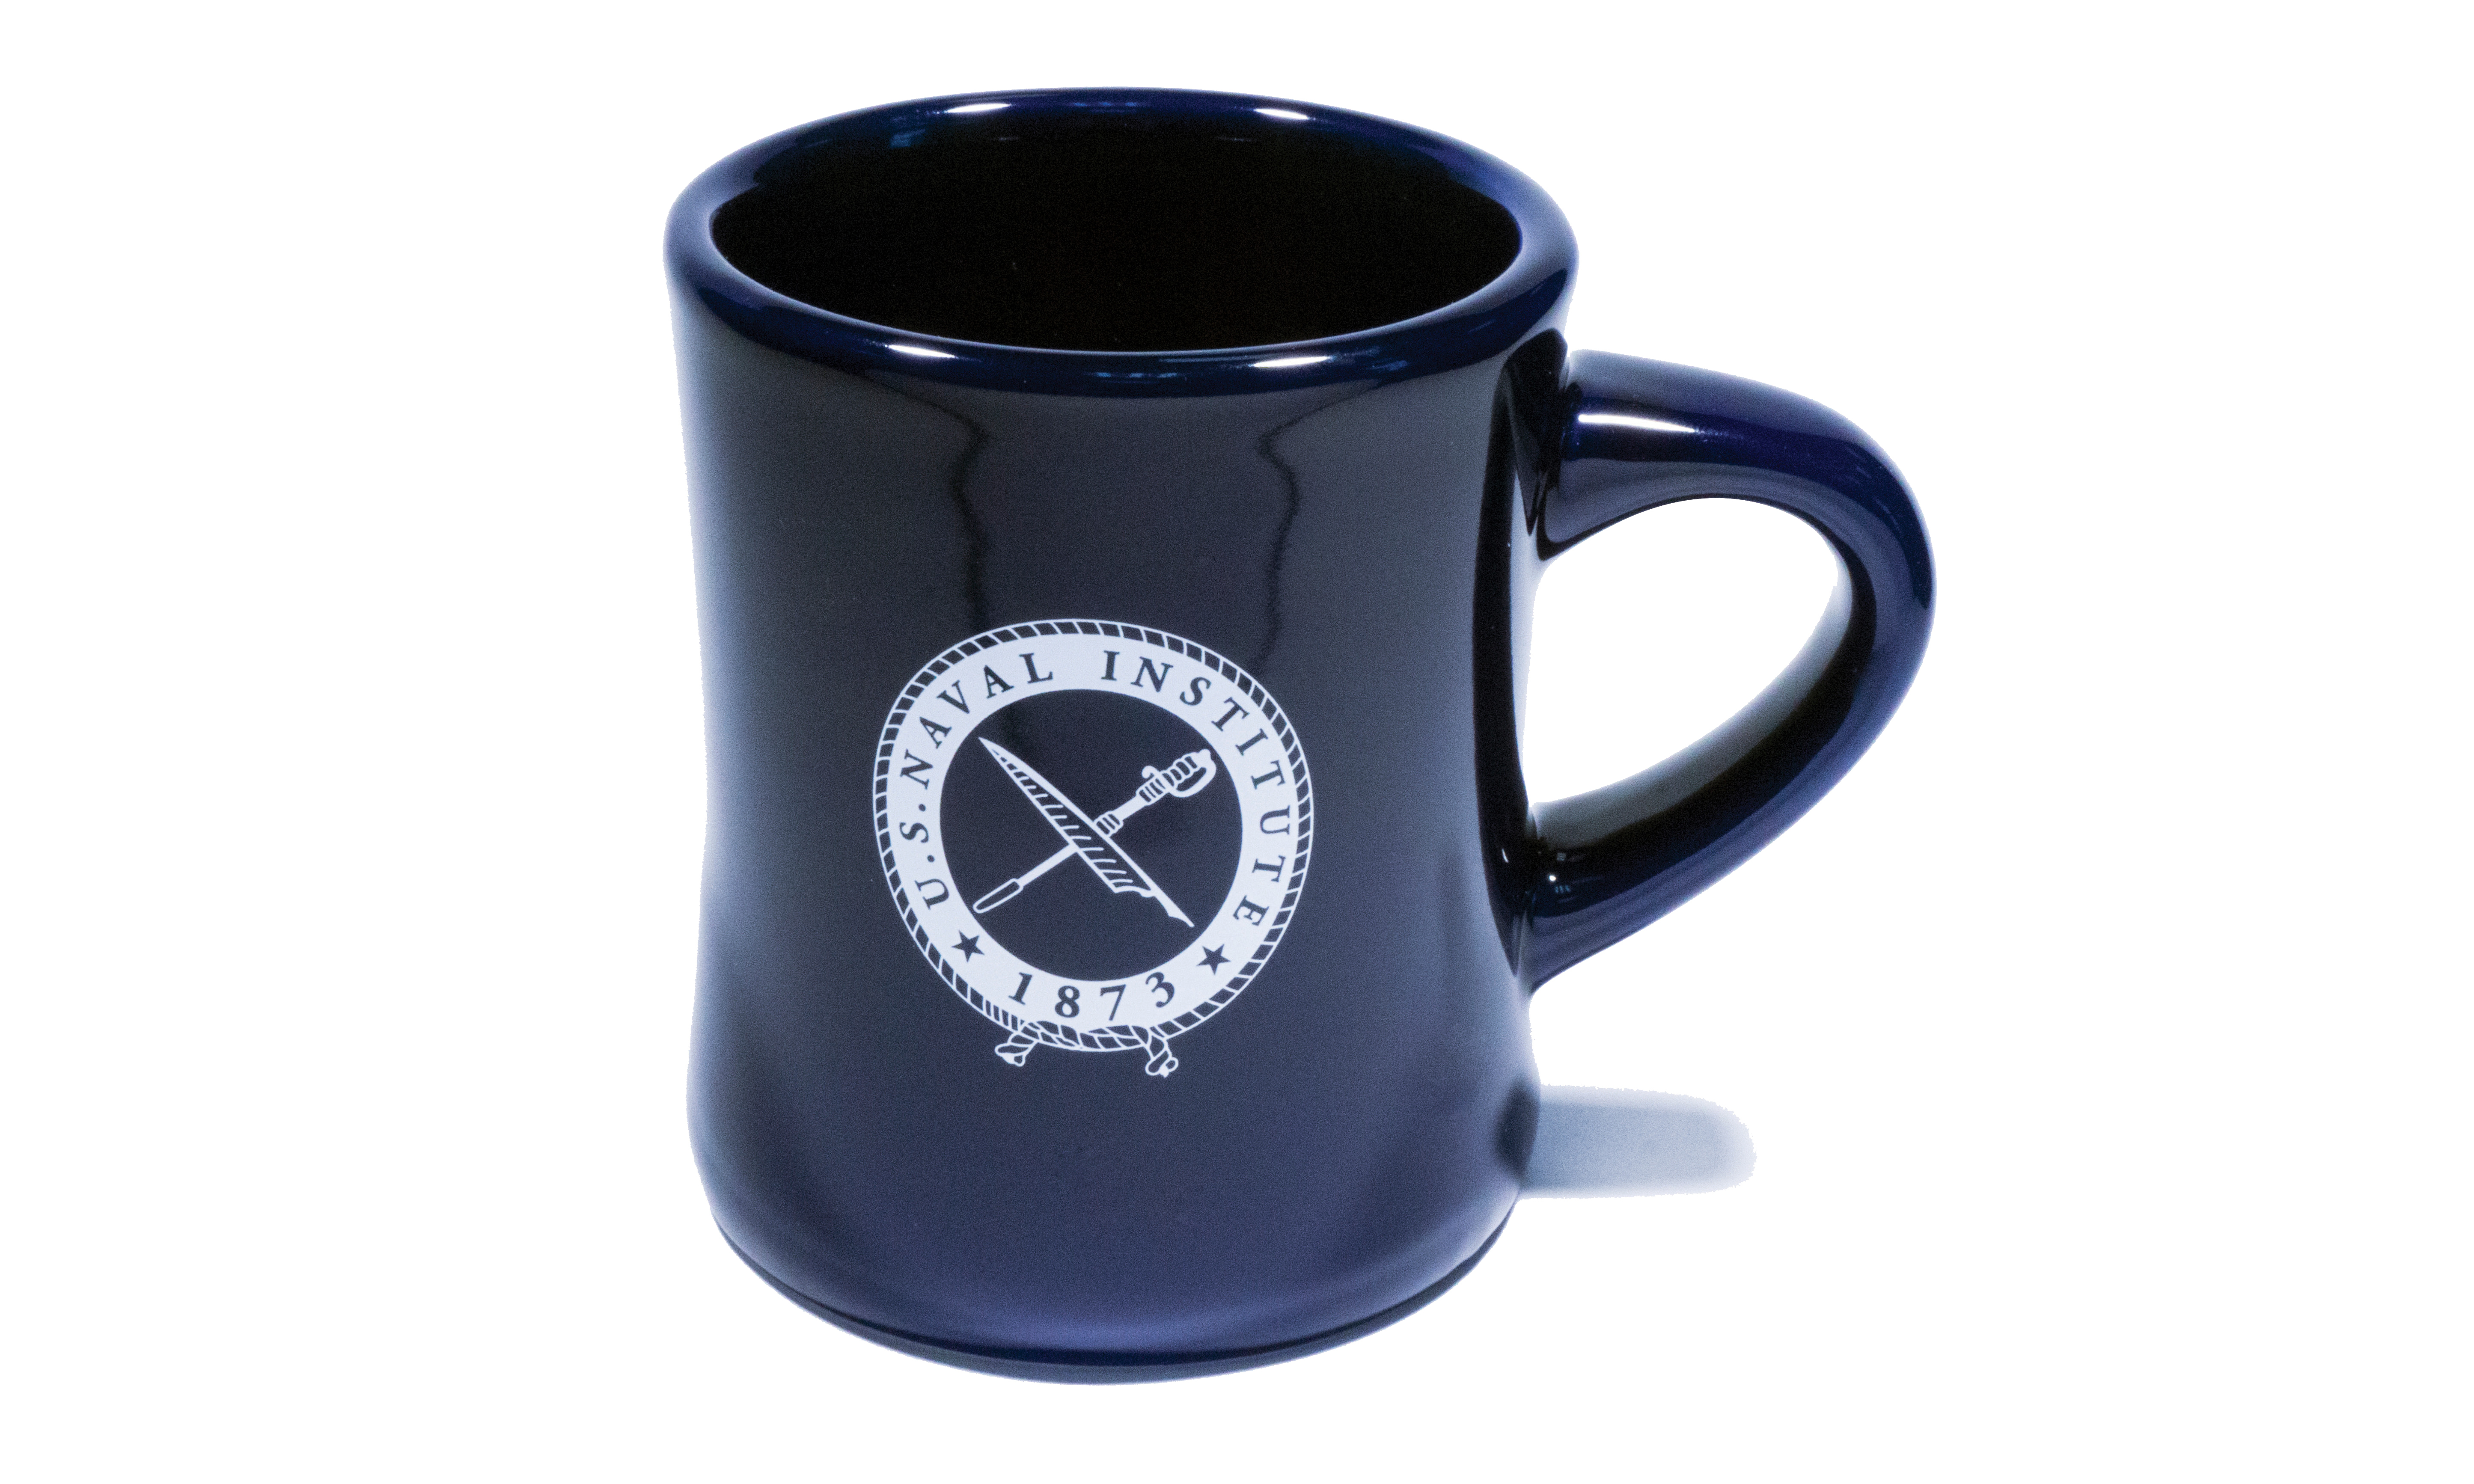 Oblique View of Diner Style U.S. Naval Institute Coffee Mug